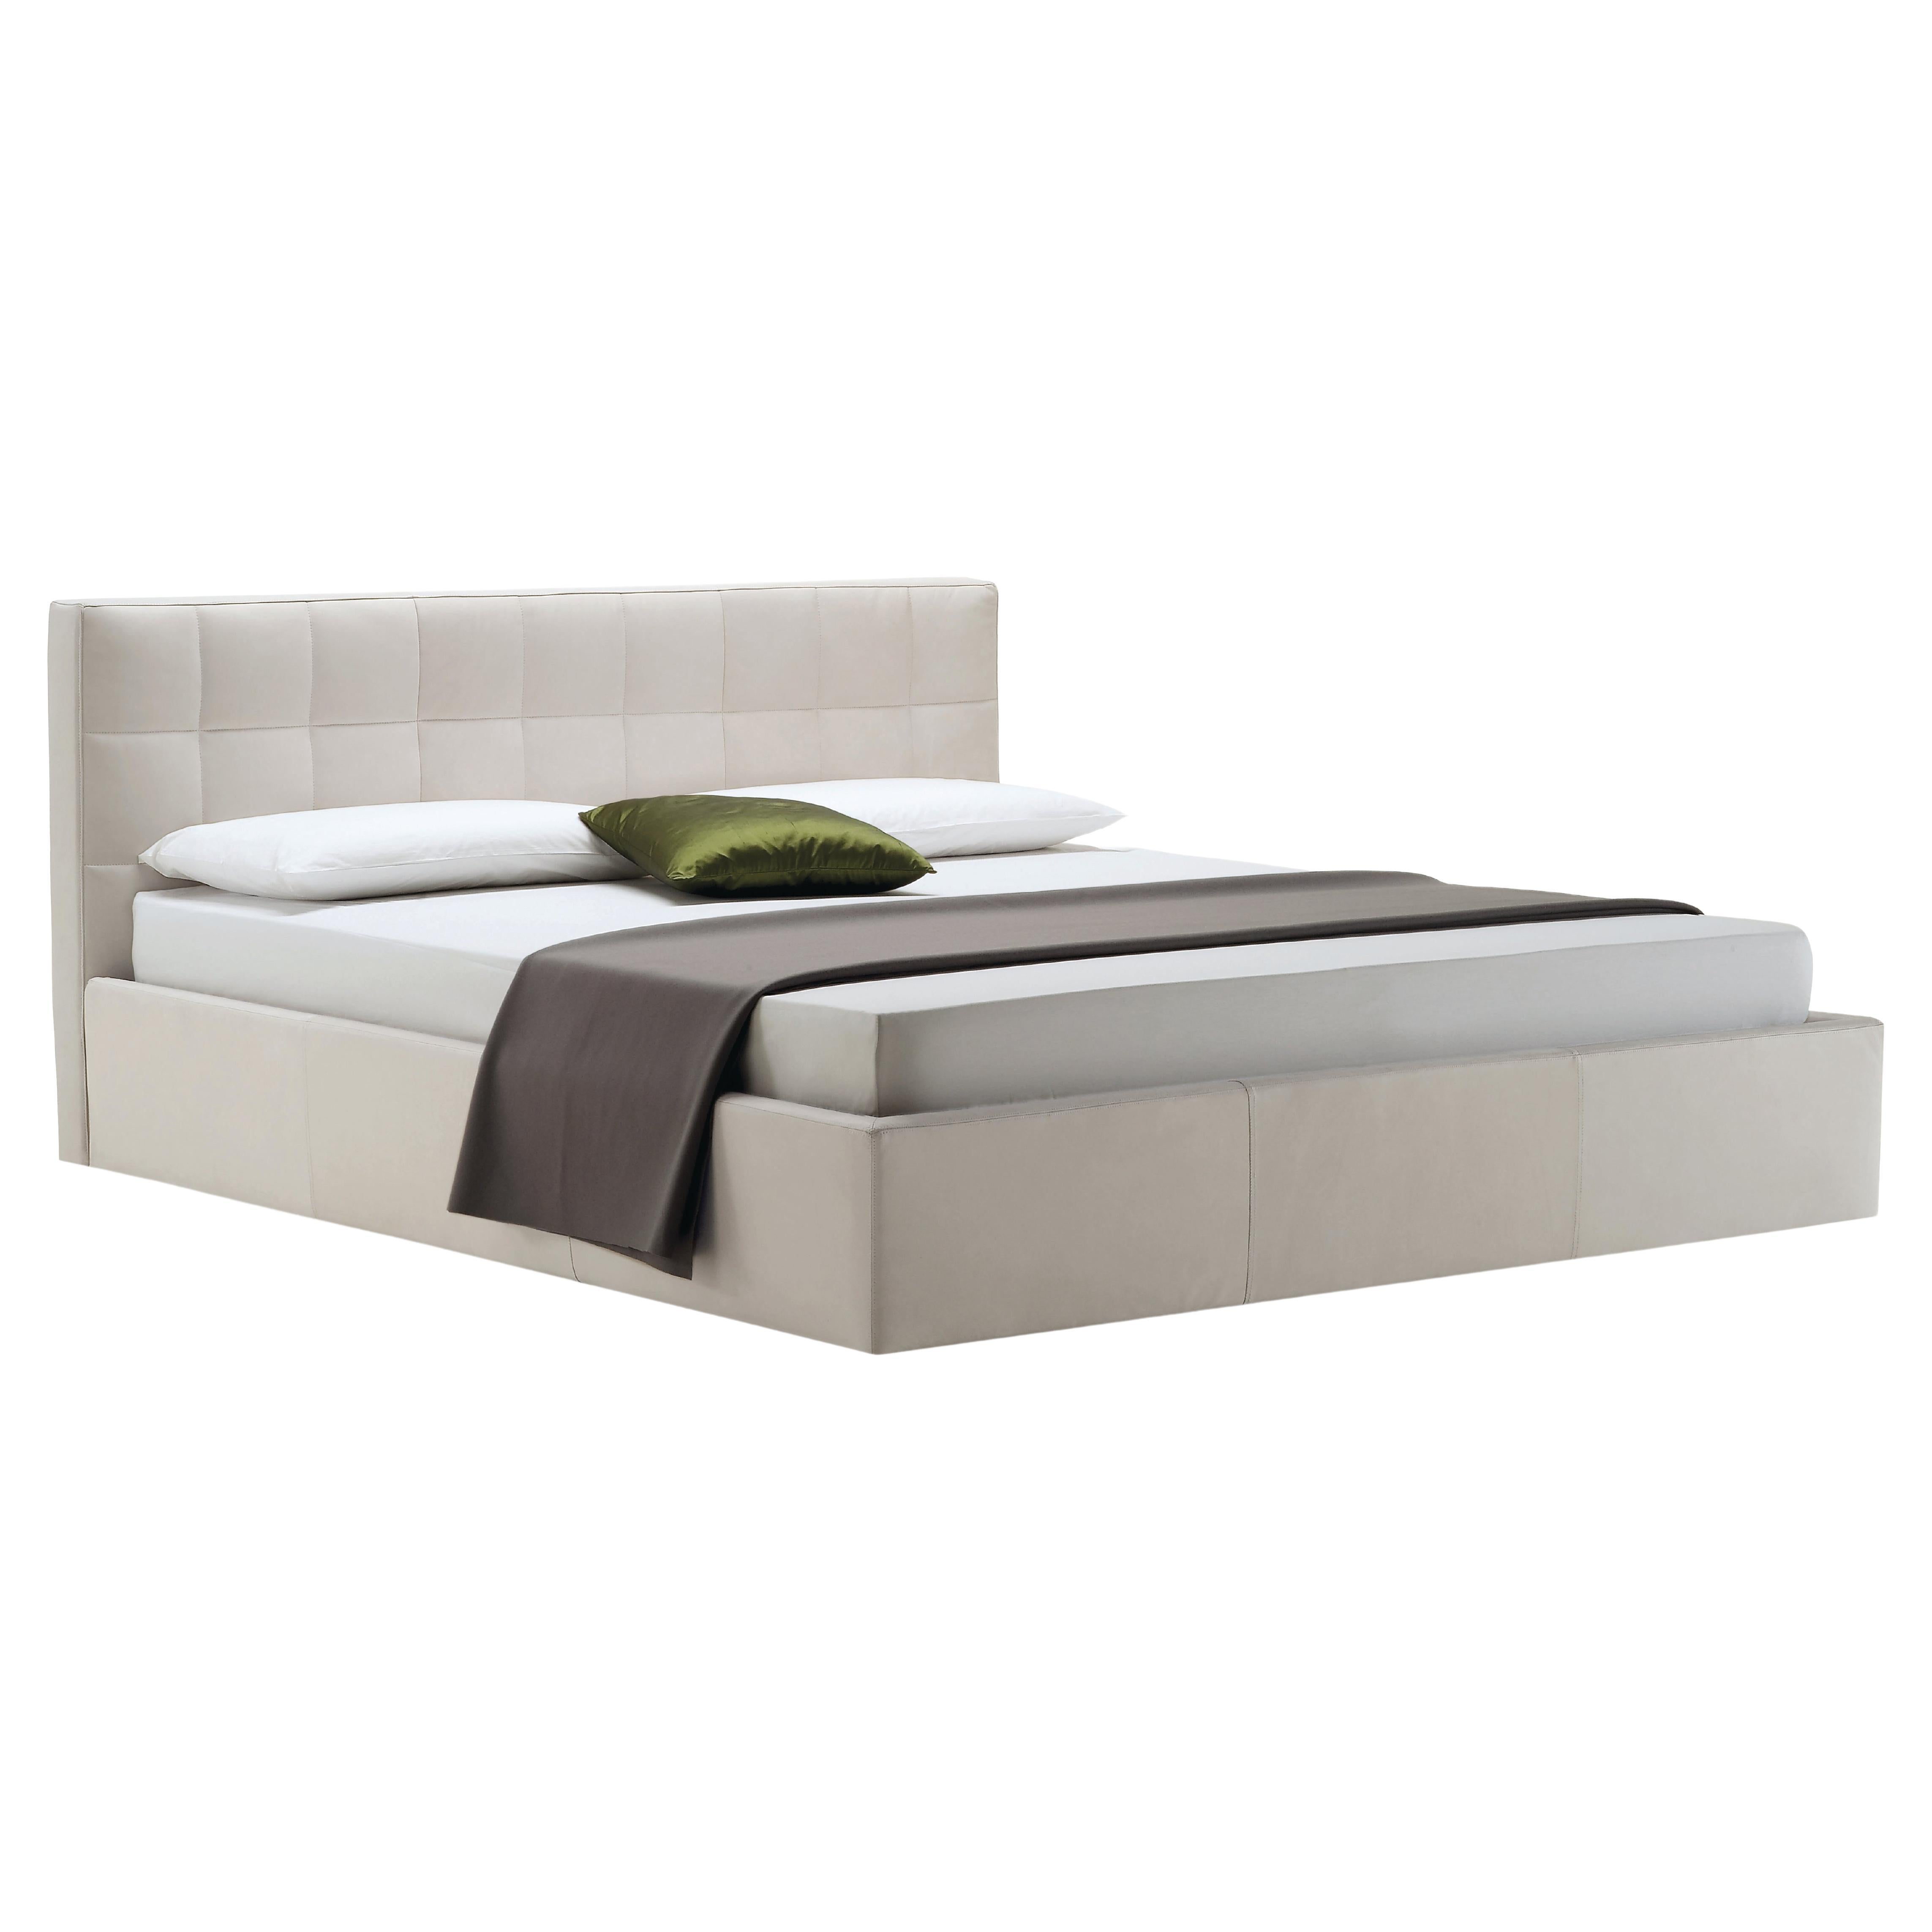 Zanotta Large Box Bed with Container Unit in Beige Upholstery with Steel Frame For Sale